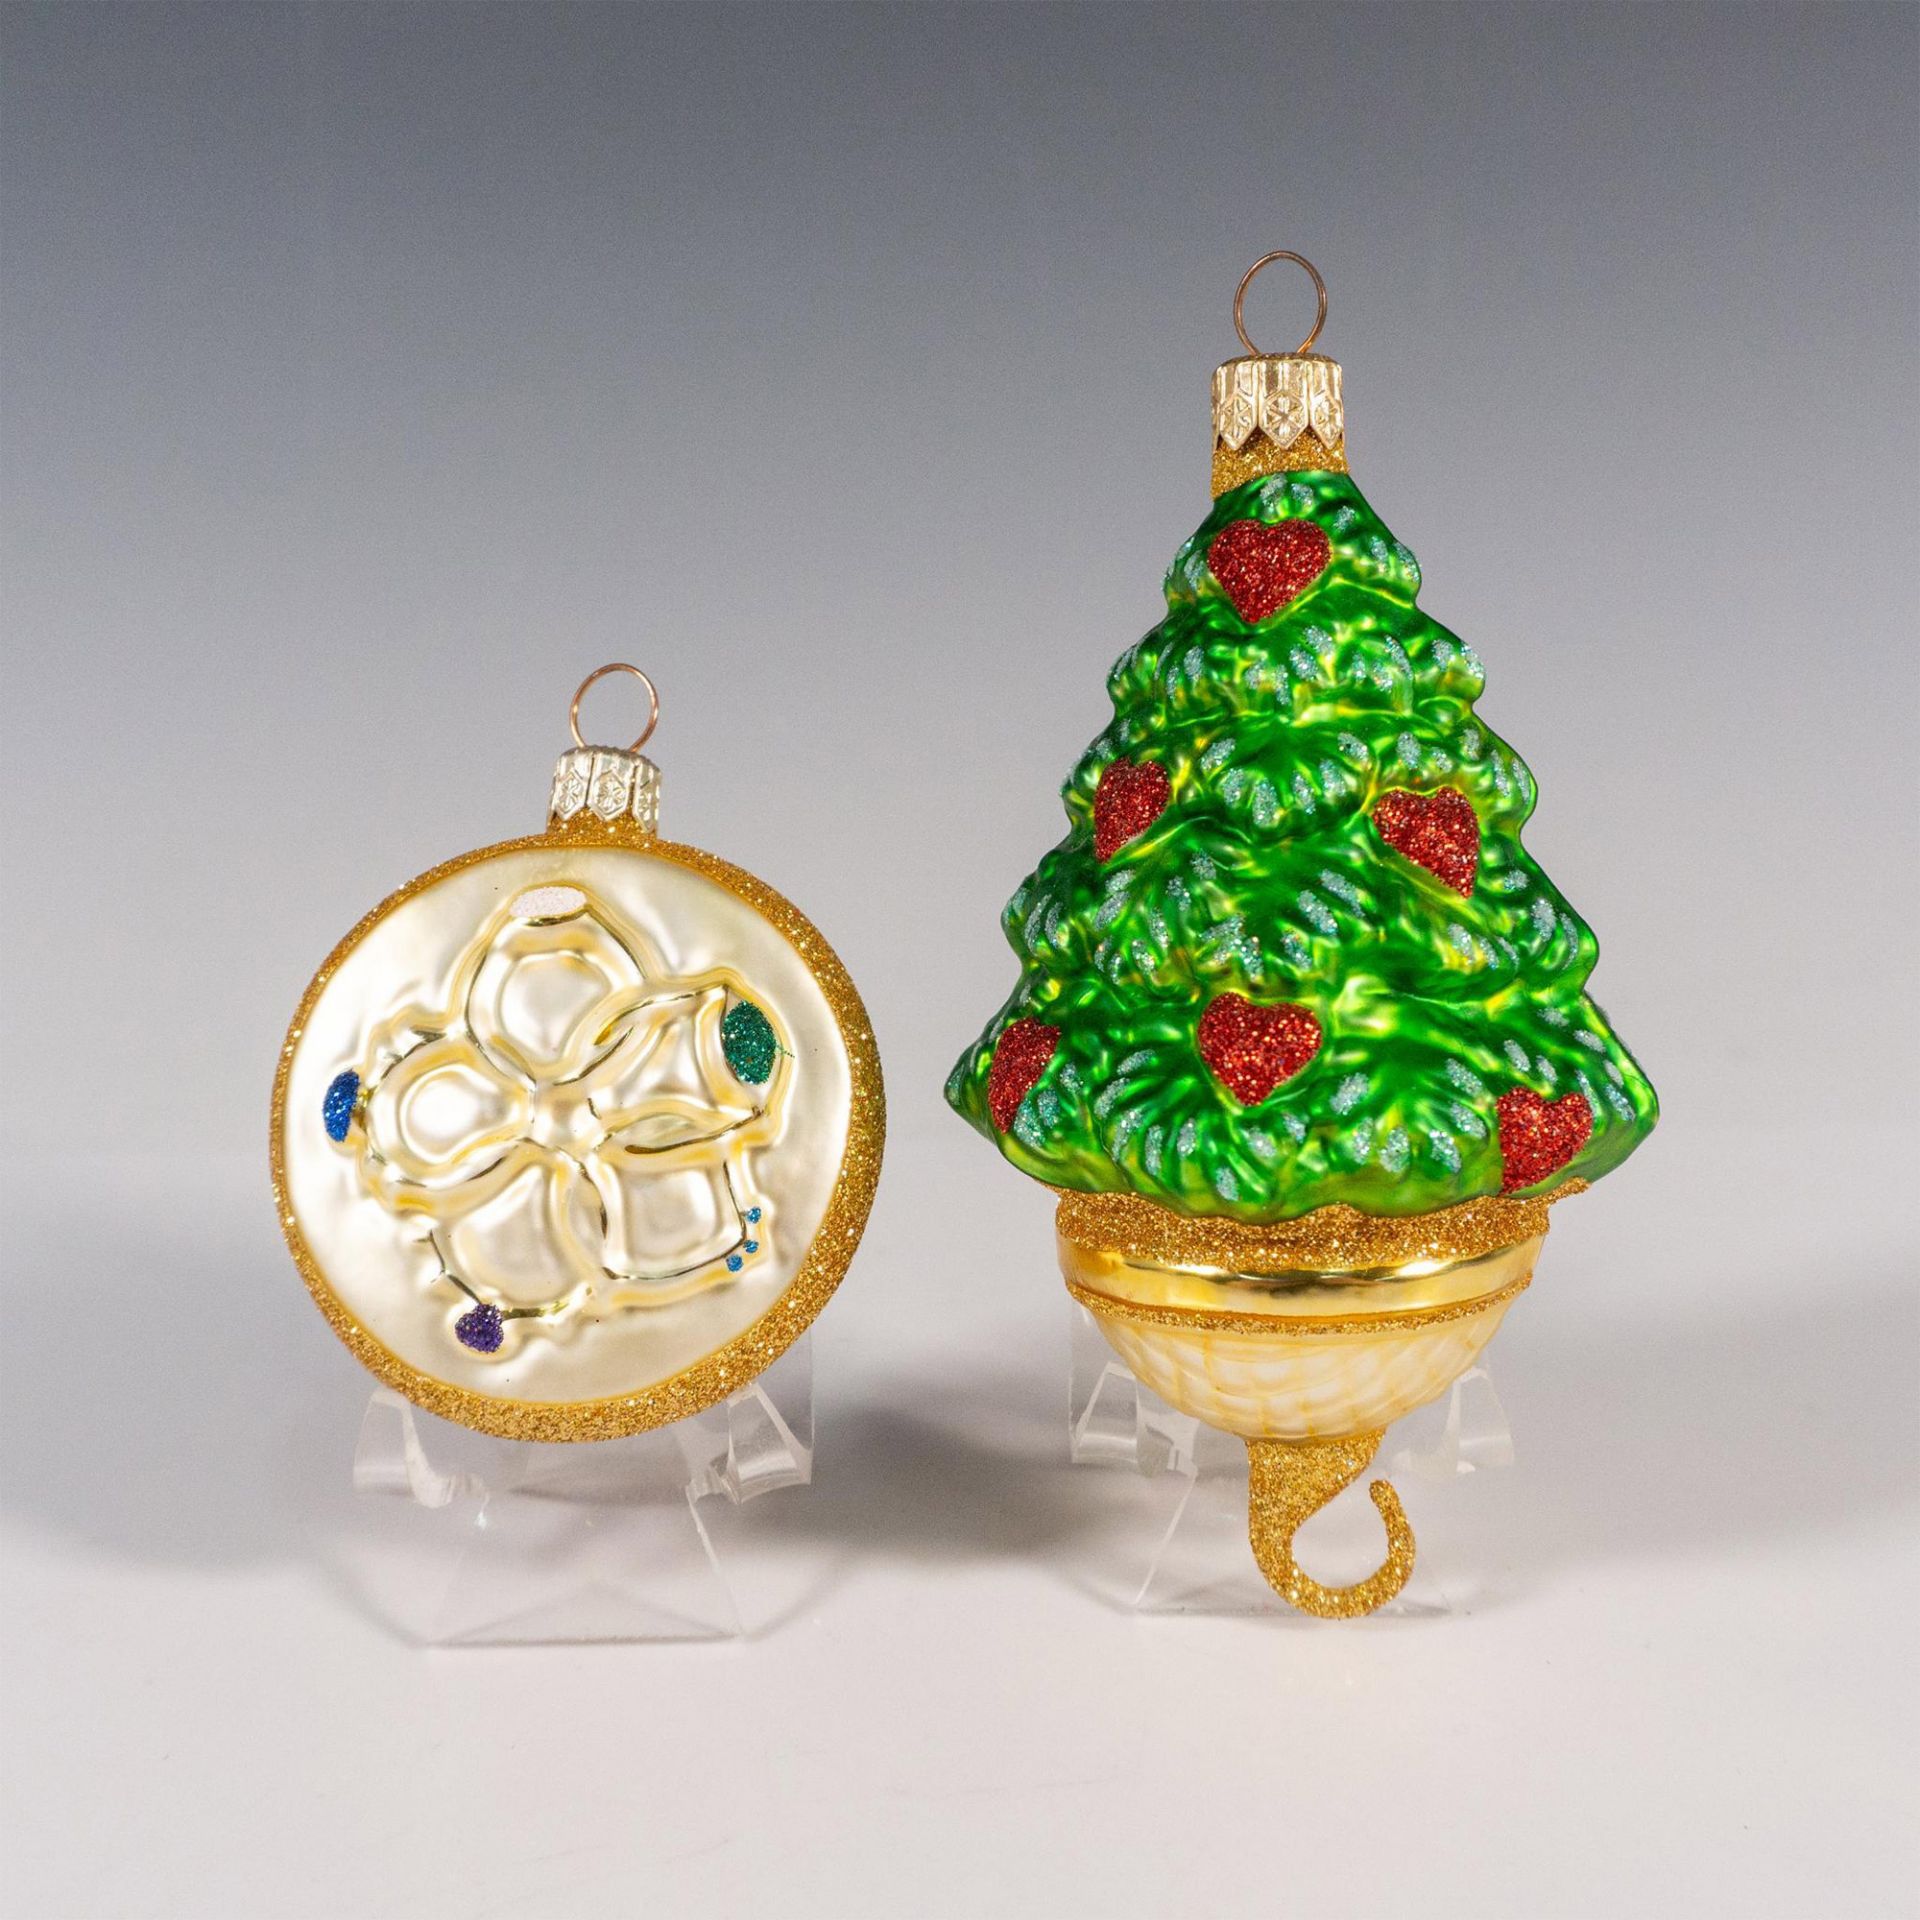 2pc Patricia Breen Christmas Ornament, Five Golden Rings - Image 2 of 2